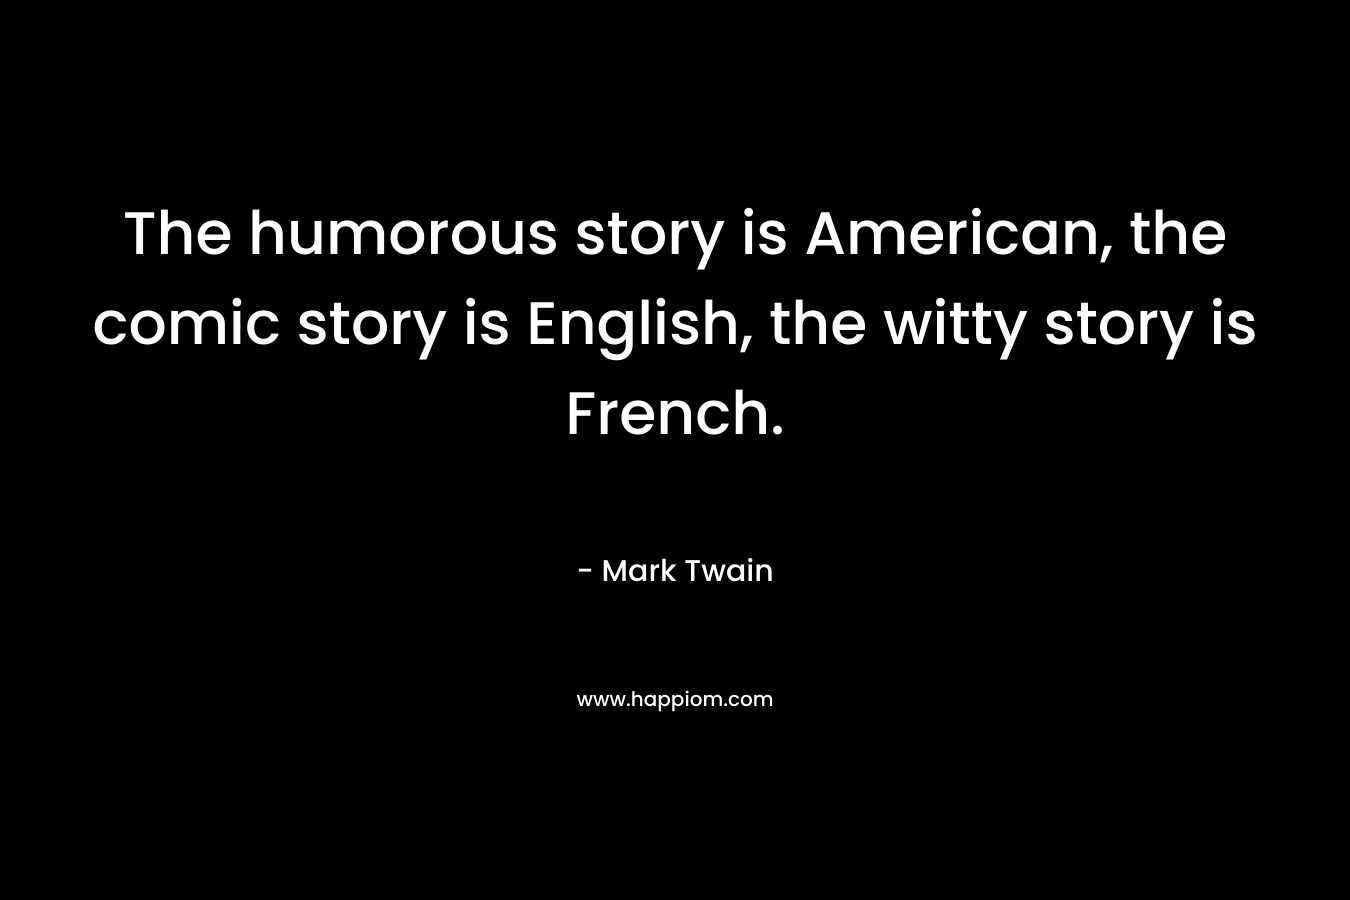 The humorous story is American, the comic story is English, the witty story is French.